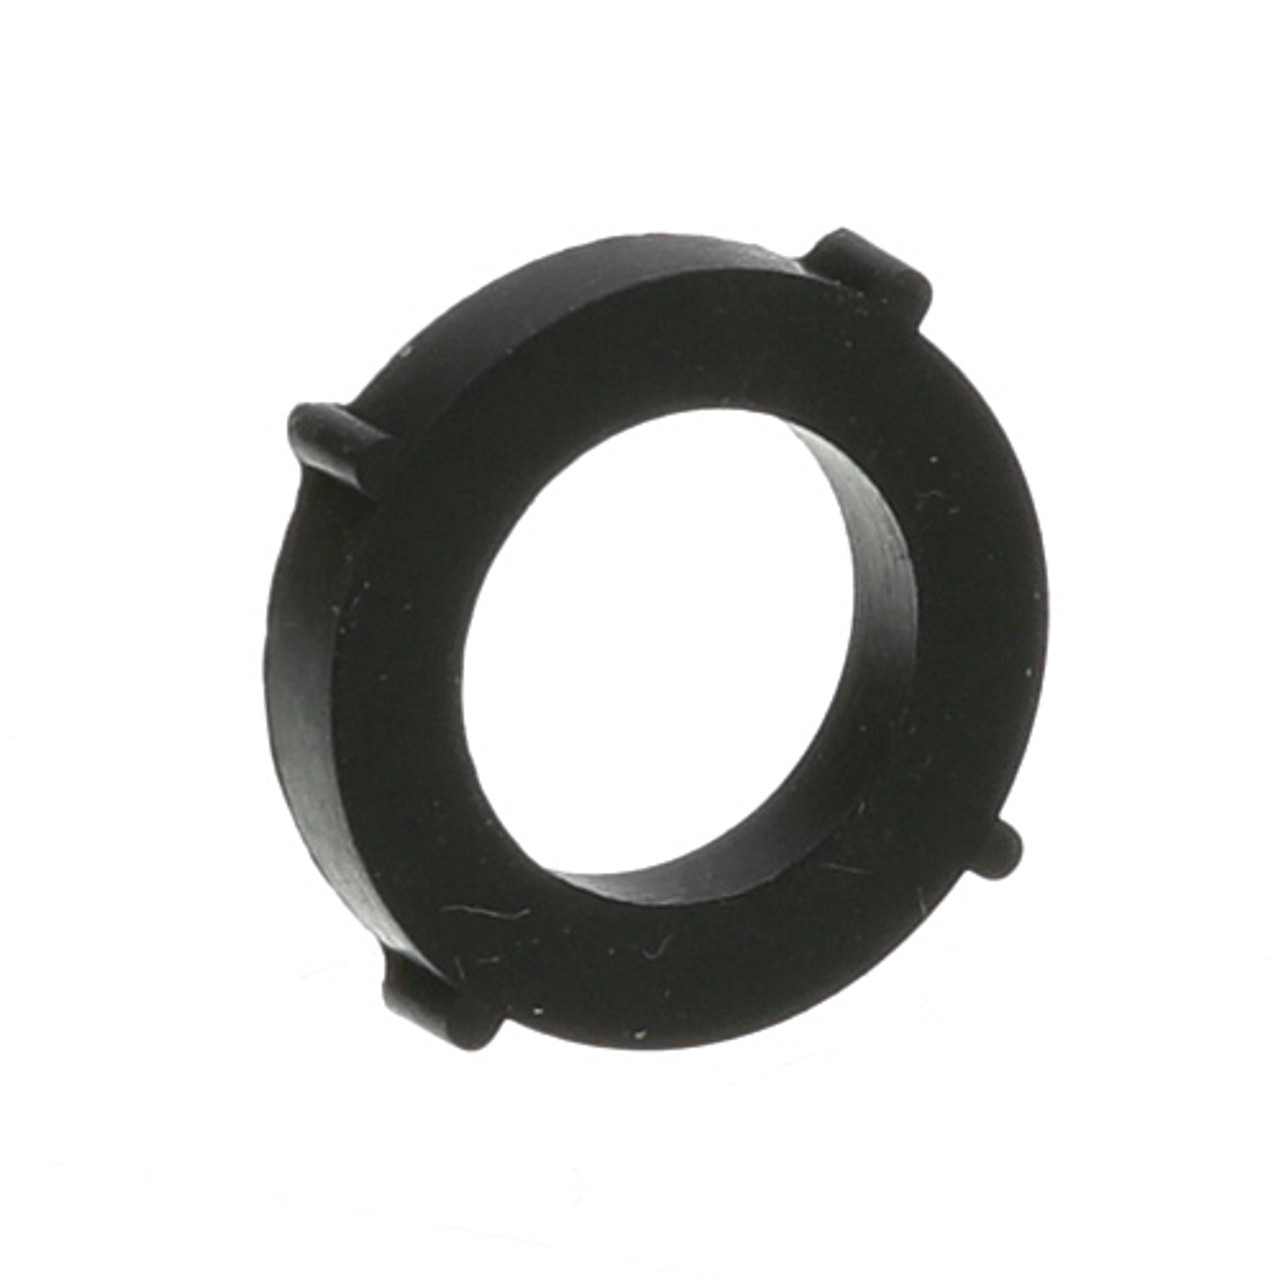 Shield Cap Washer - Replacement Part For Cecilware 38317